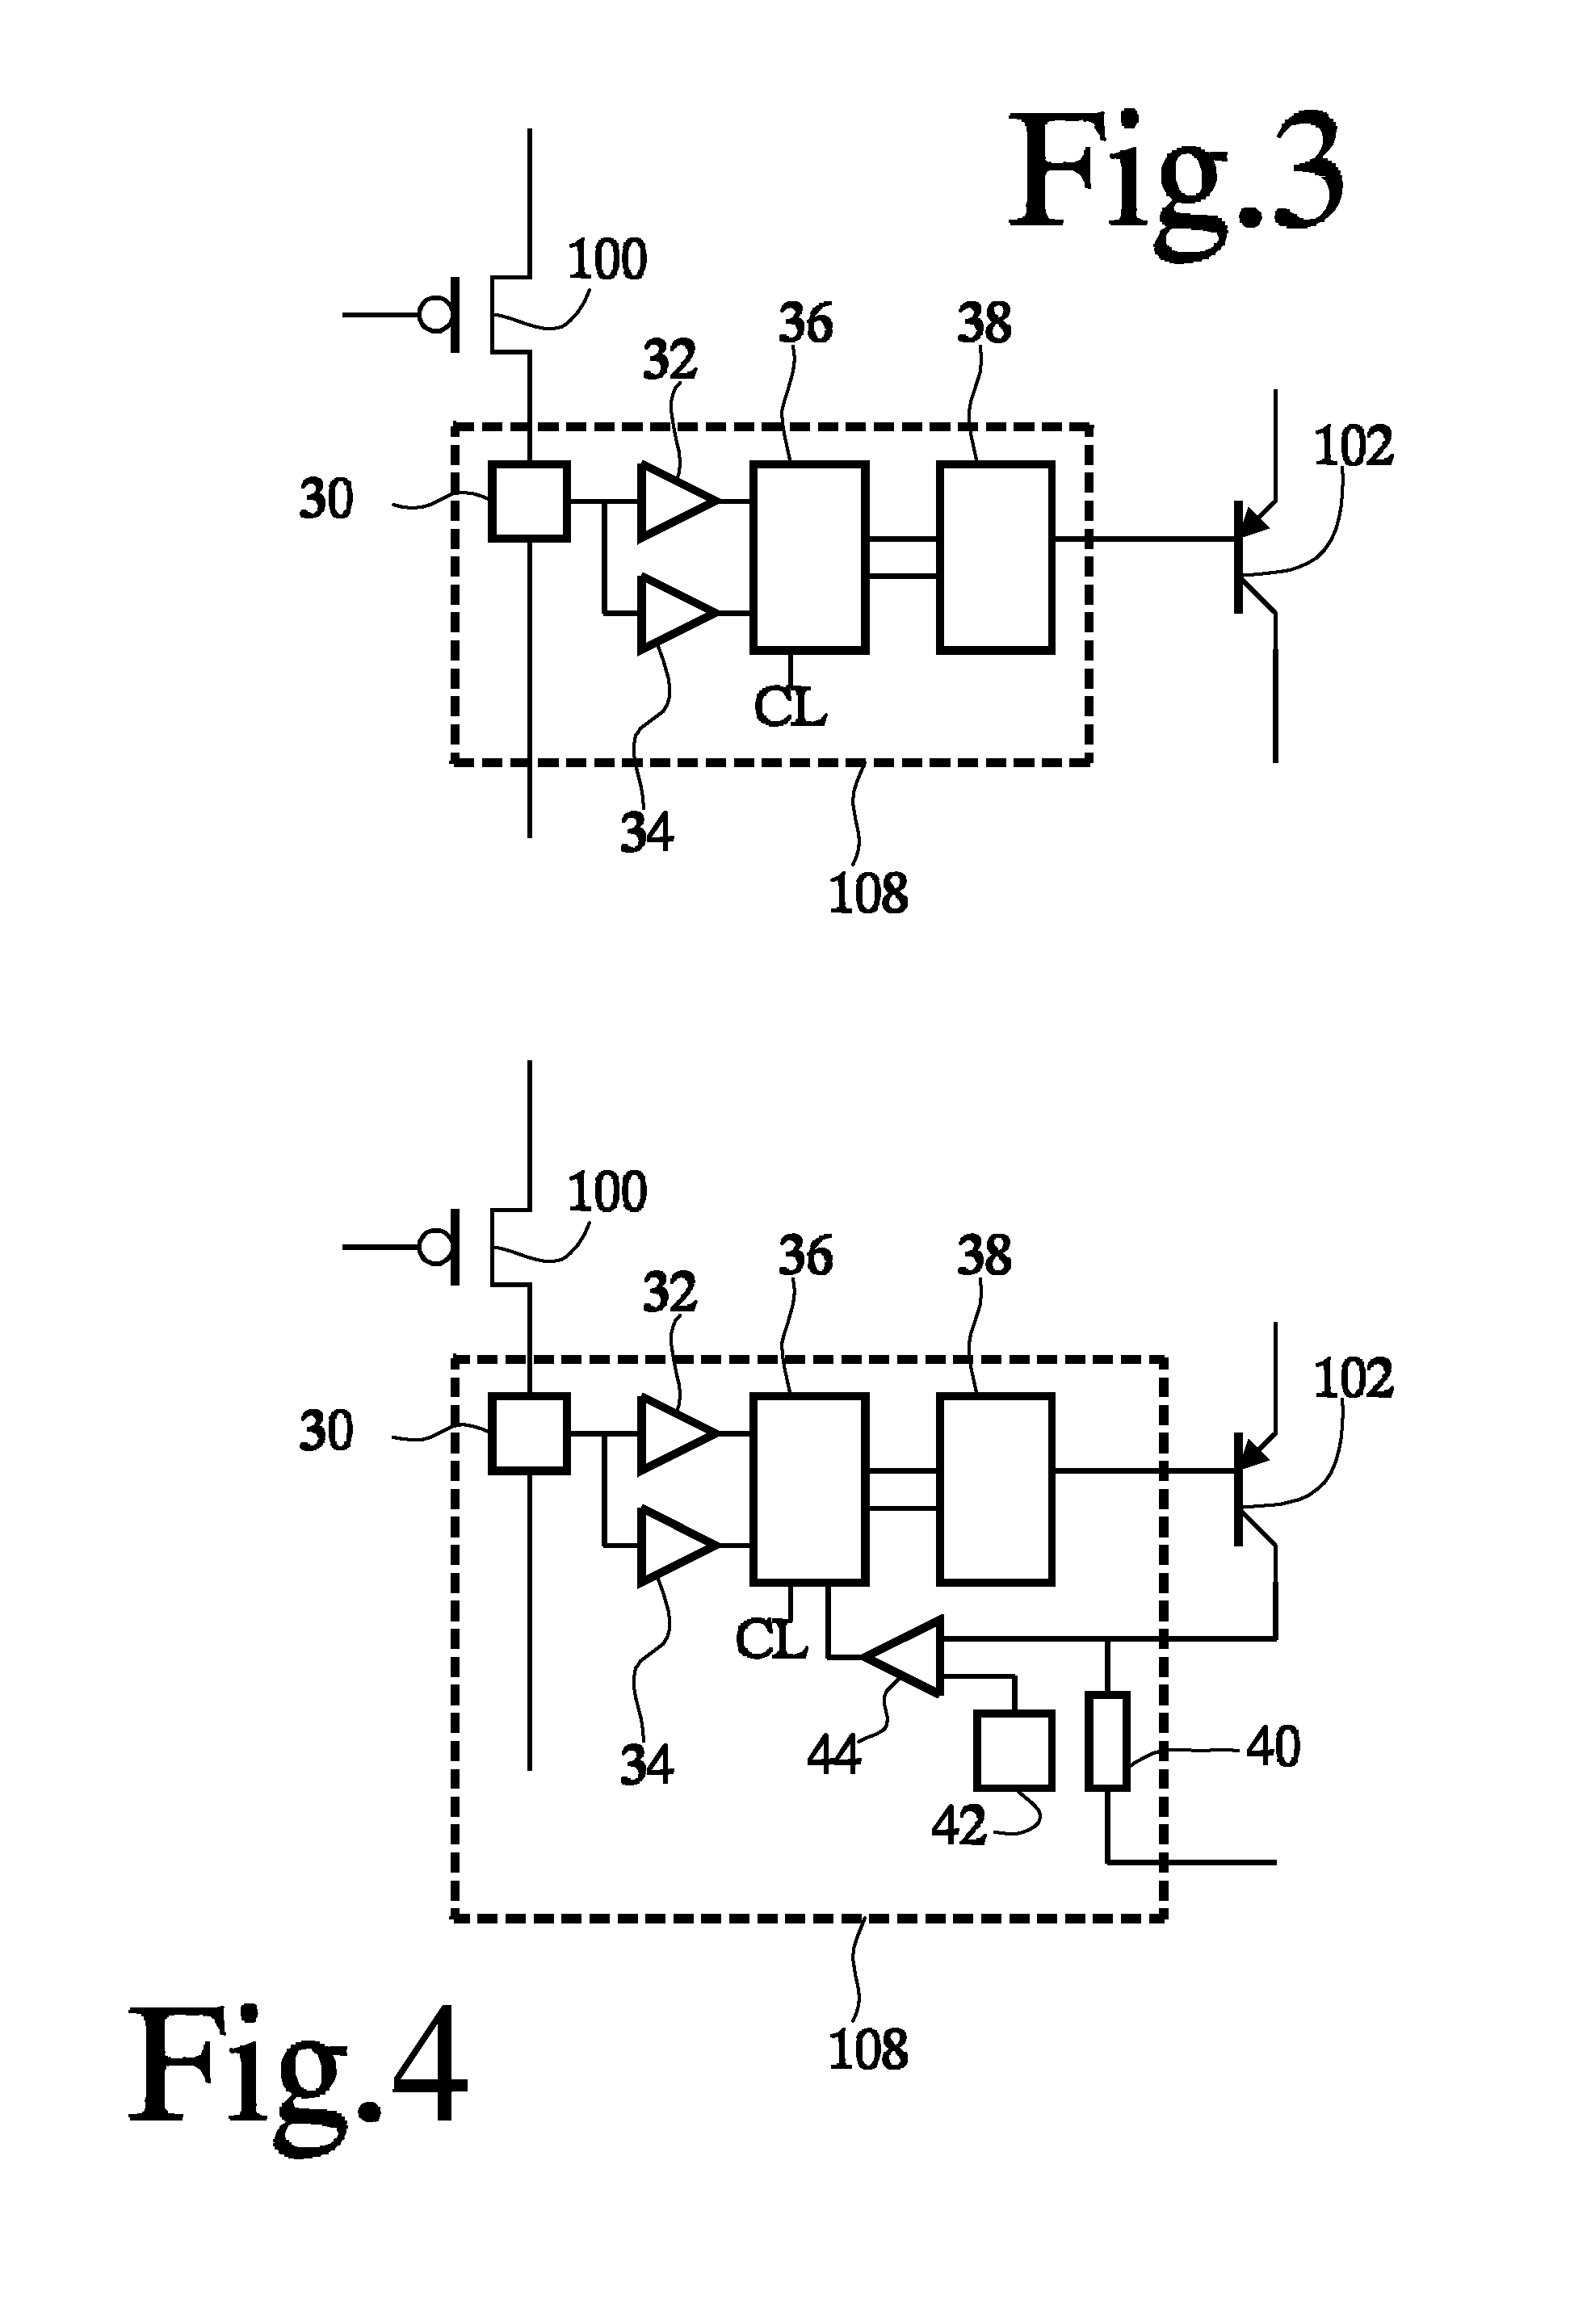 Electronic circuit with a regulated power supply circuit